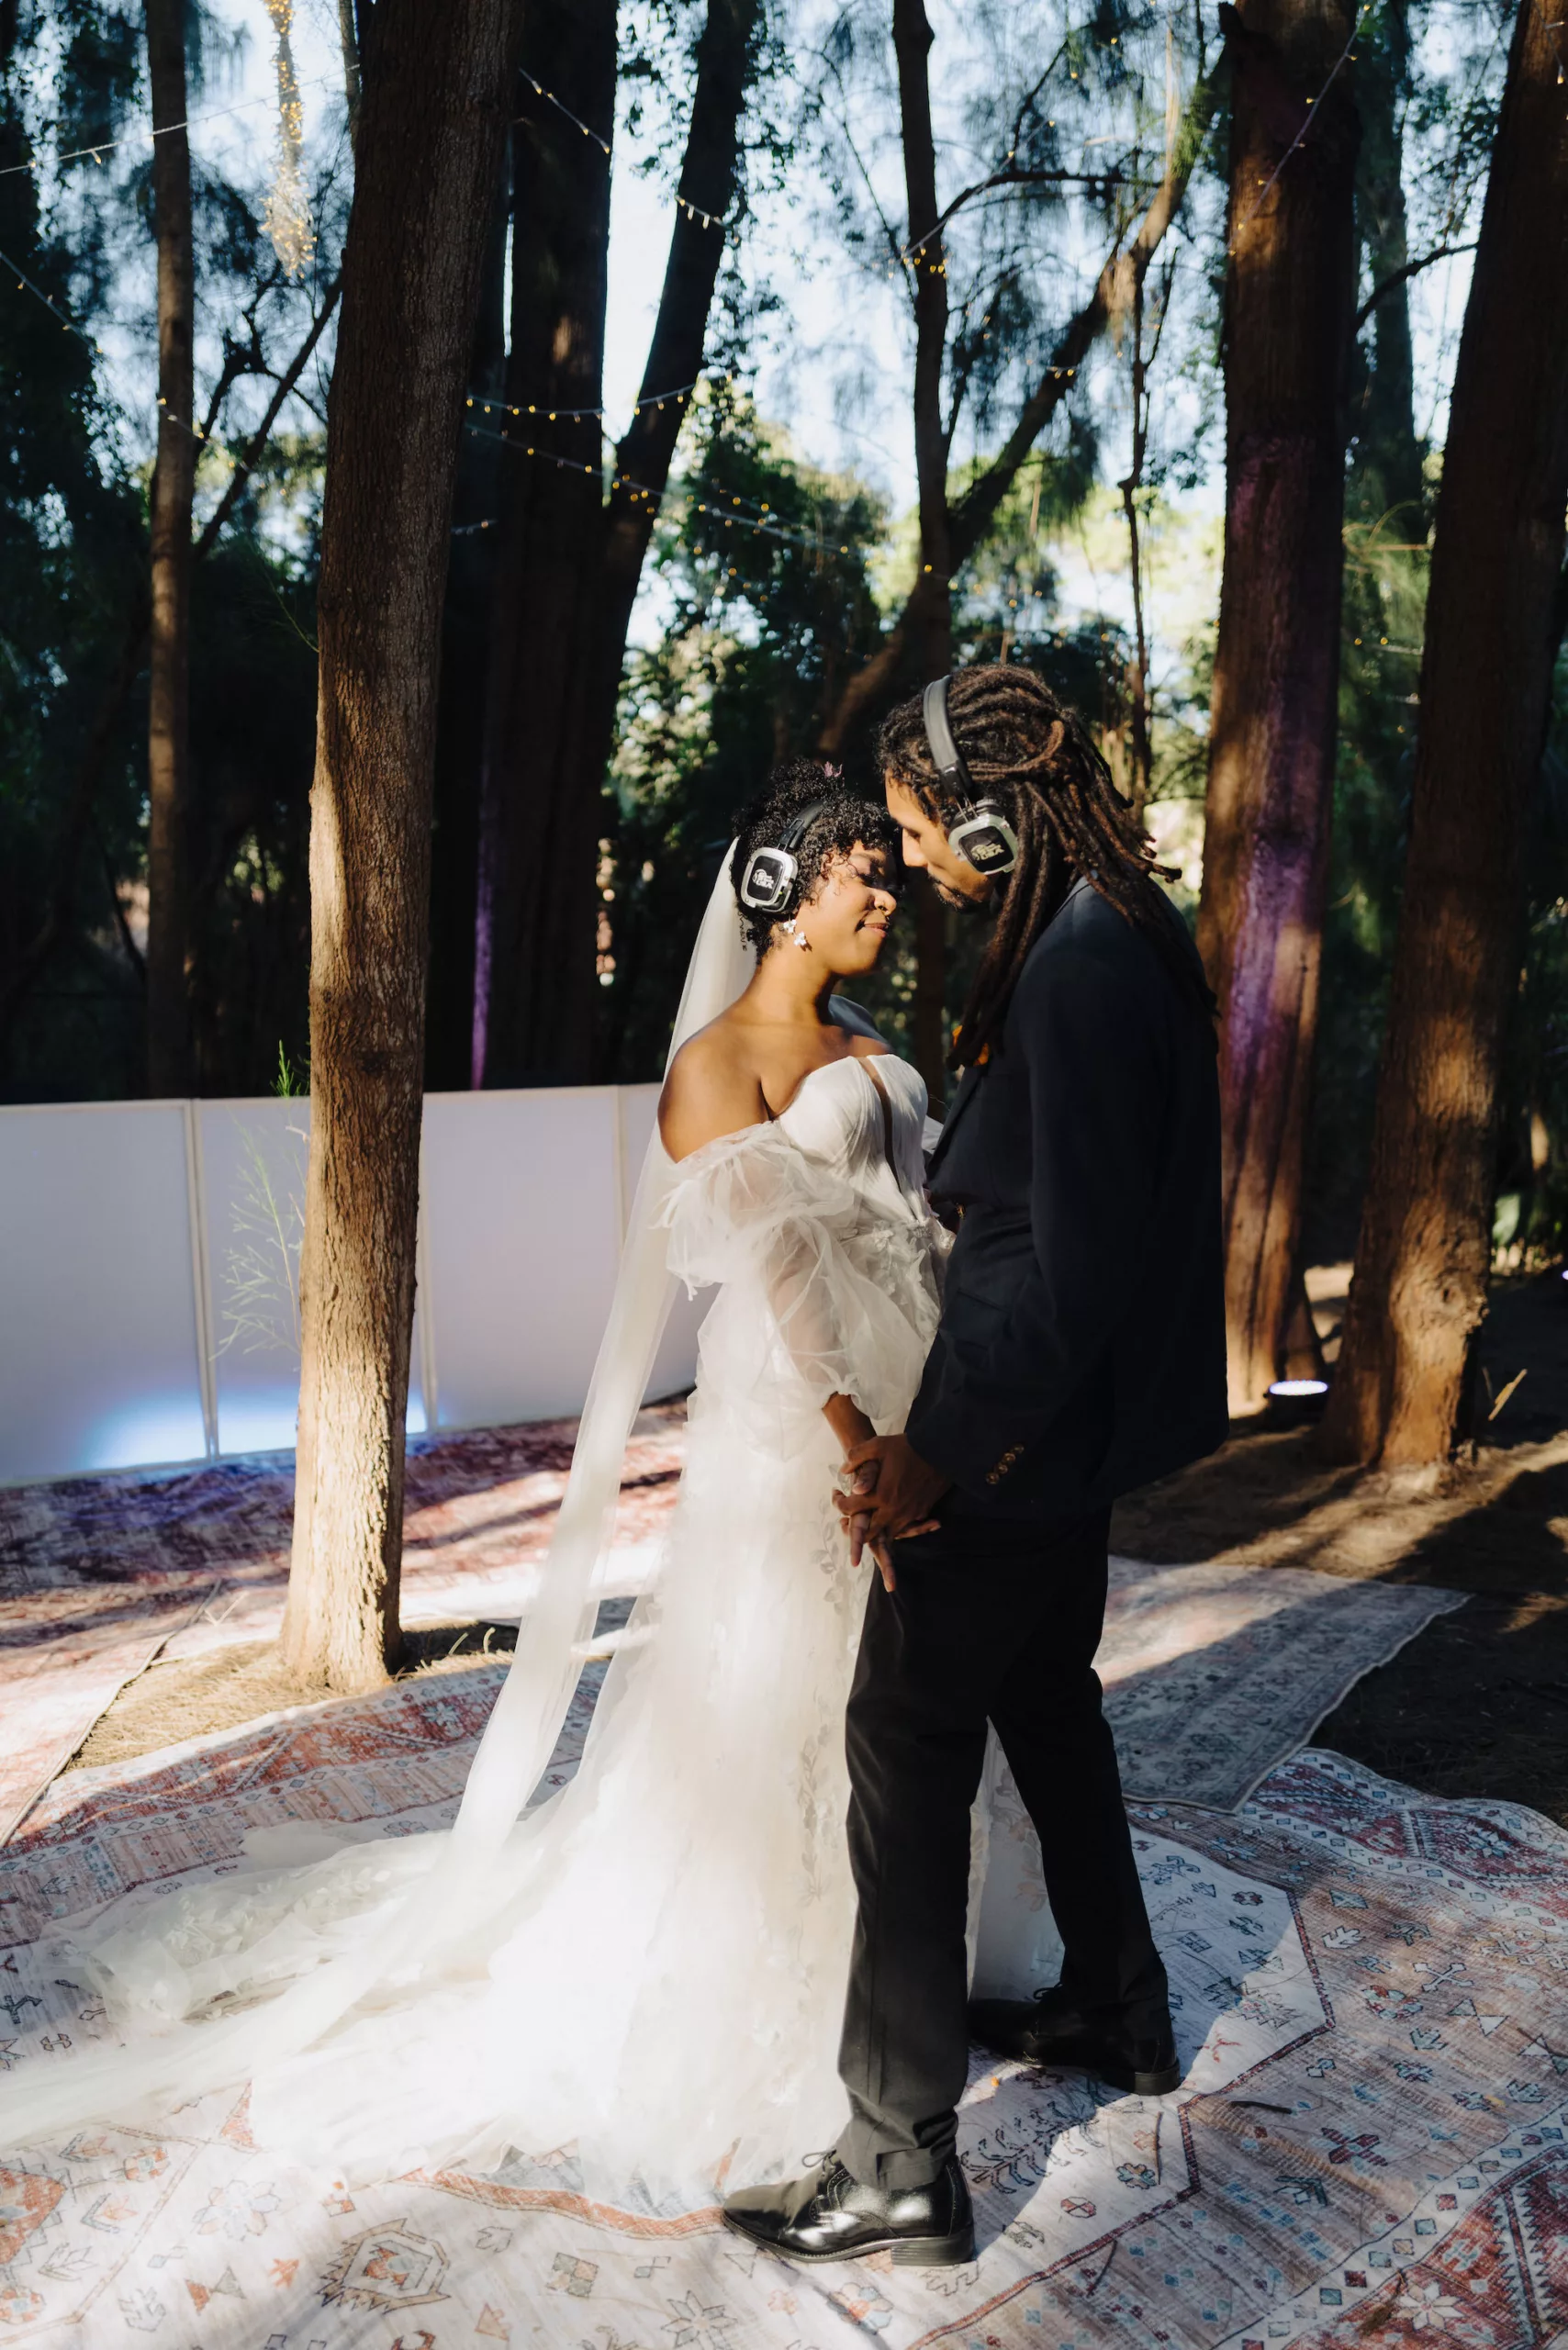 Bride and Groom Wedding Reception Silent Disco Inspiration | Tampa Bay Photographer McNeile Photography | Outdoor Private Estate Wedding Venue Royal Pine Estate